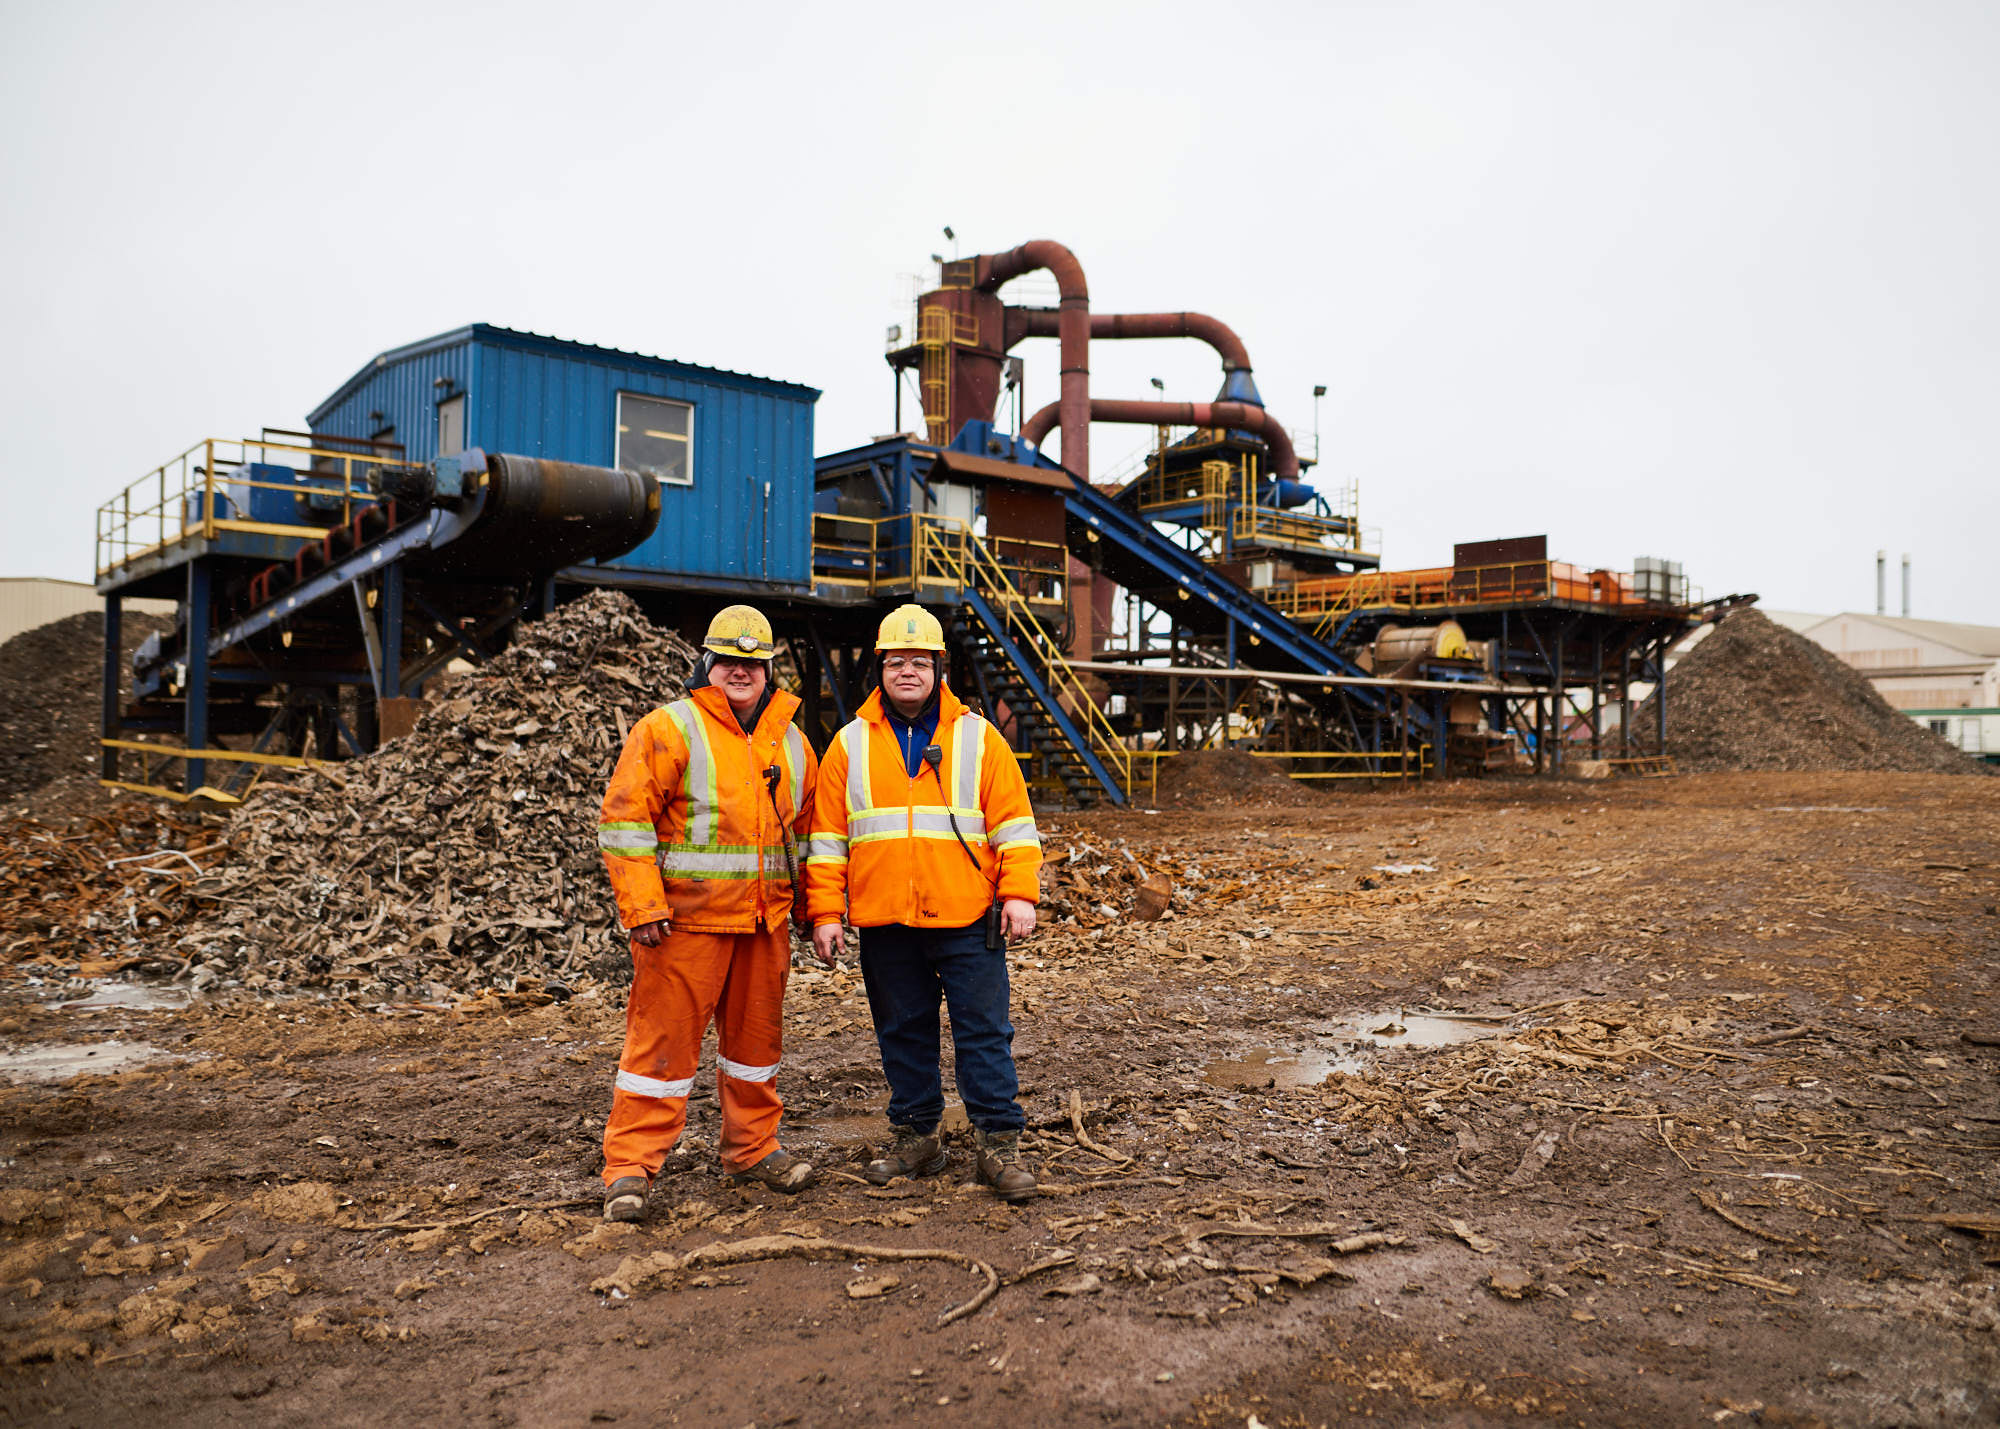 Industrial photography portrait of two male steel workers standing outside manufacturing and recycling machinery